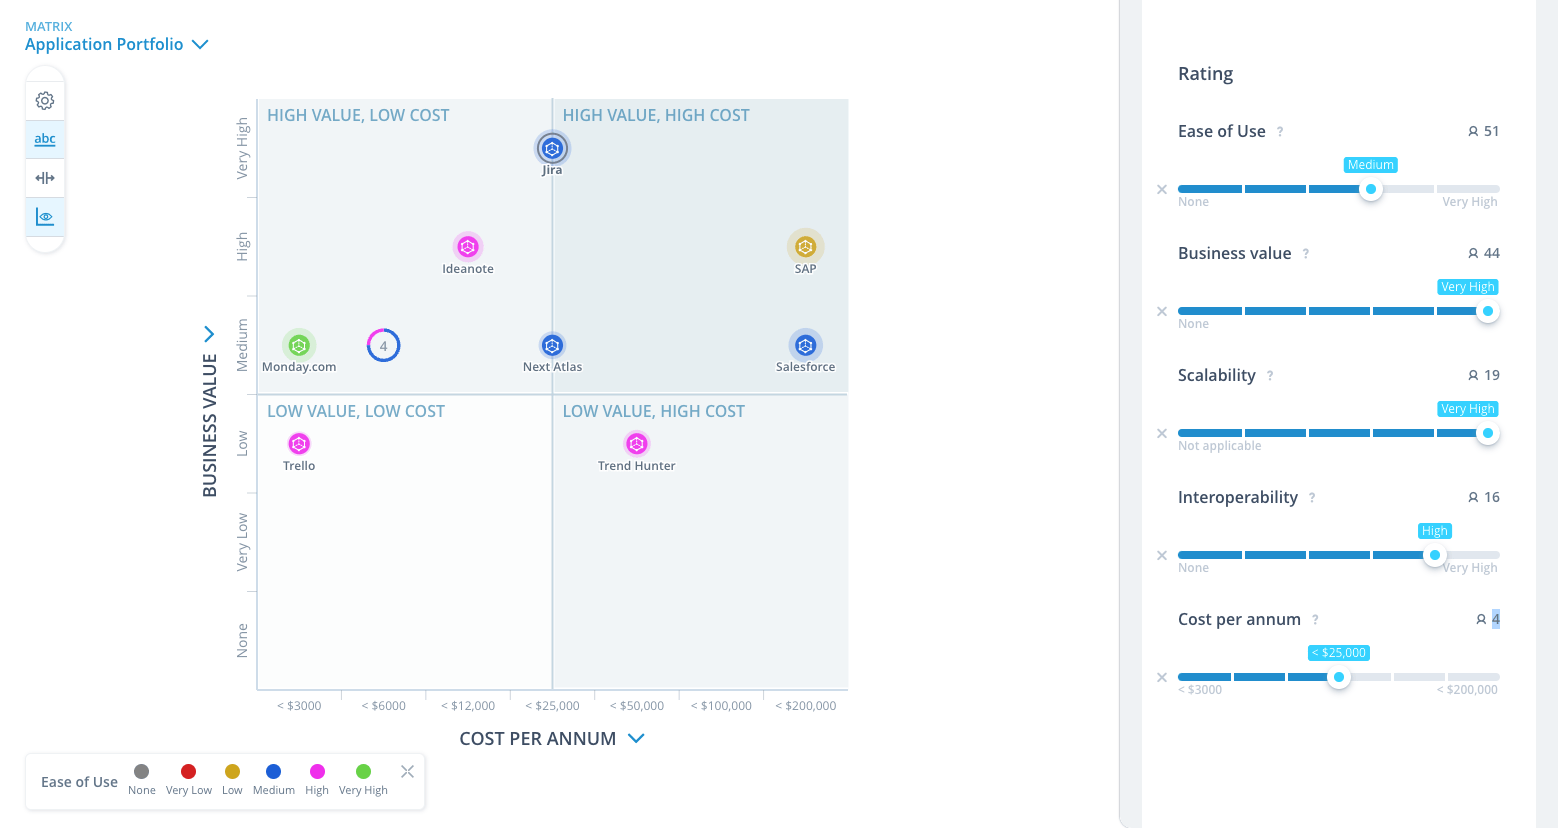 An Application Portfolio Matrix on the ITONICS platform with ratings on the right side